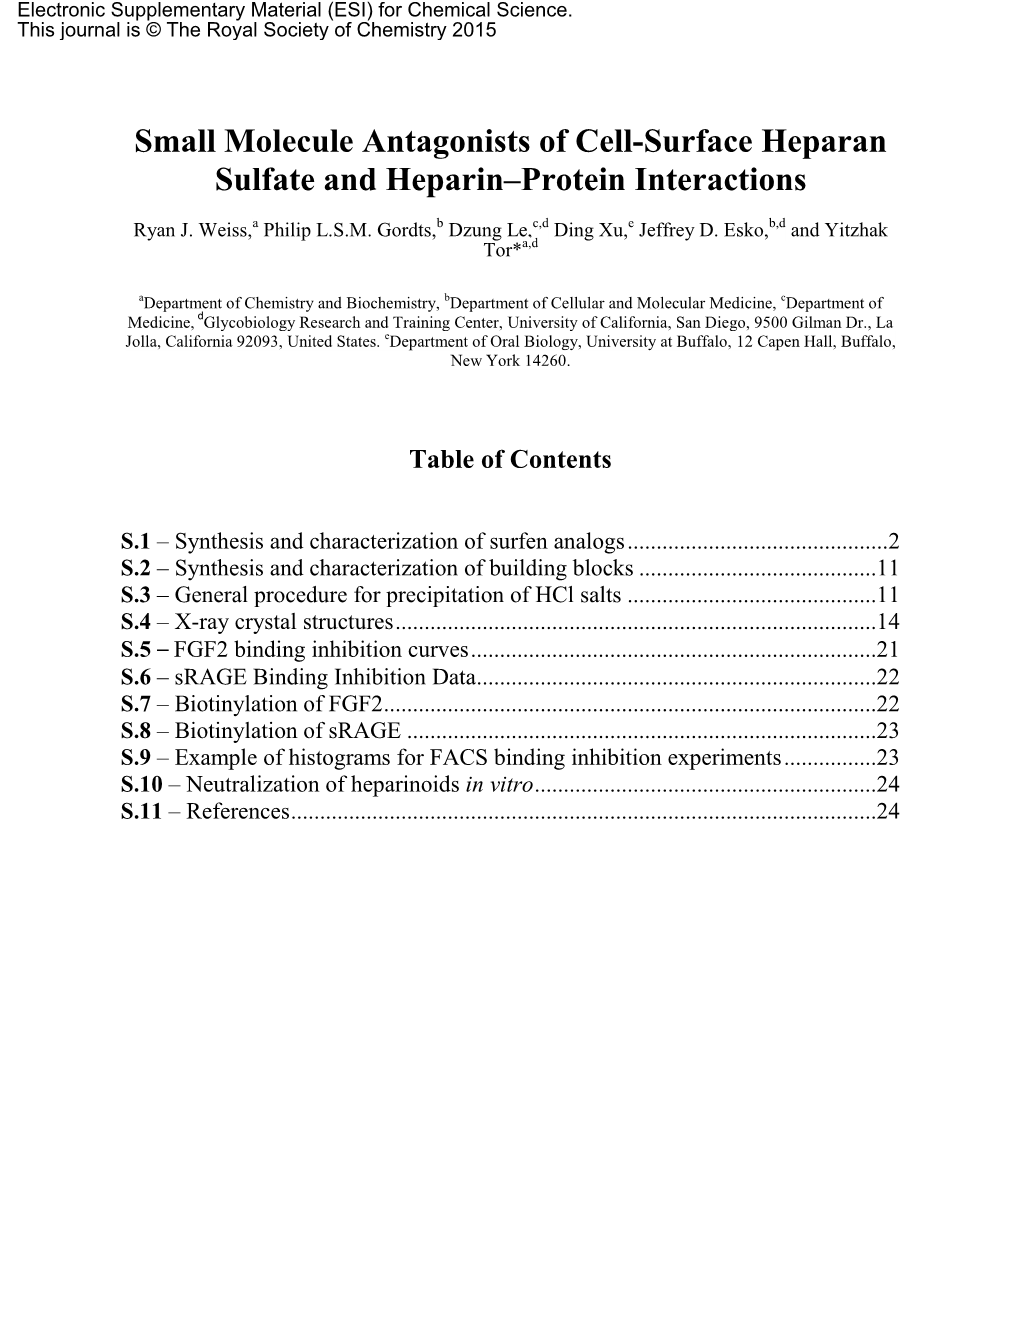 Small Molecule Antagonists of Cell-Surface Heparan Sulfate and Heparin–Protein Interactions